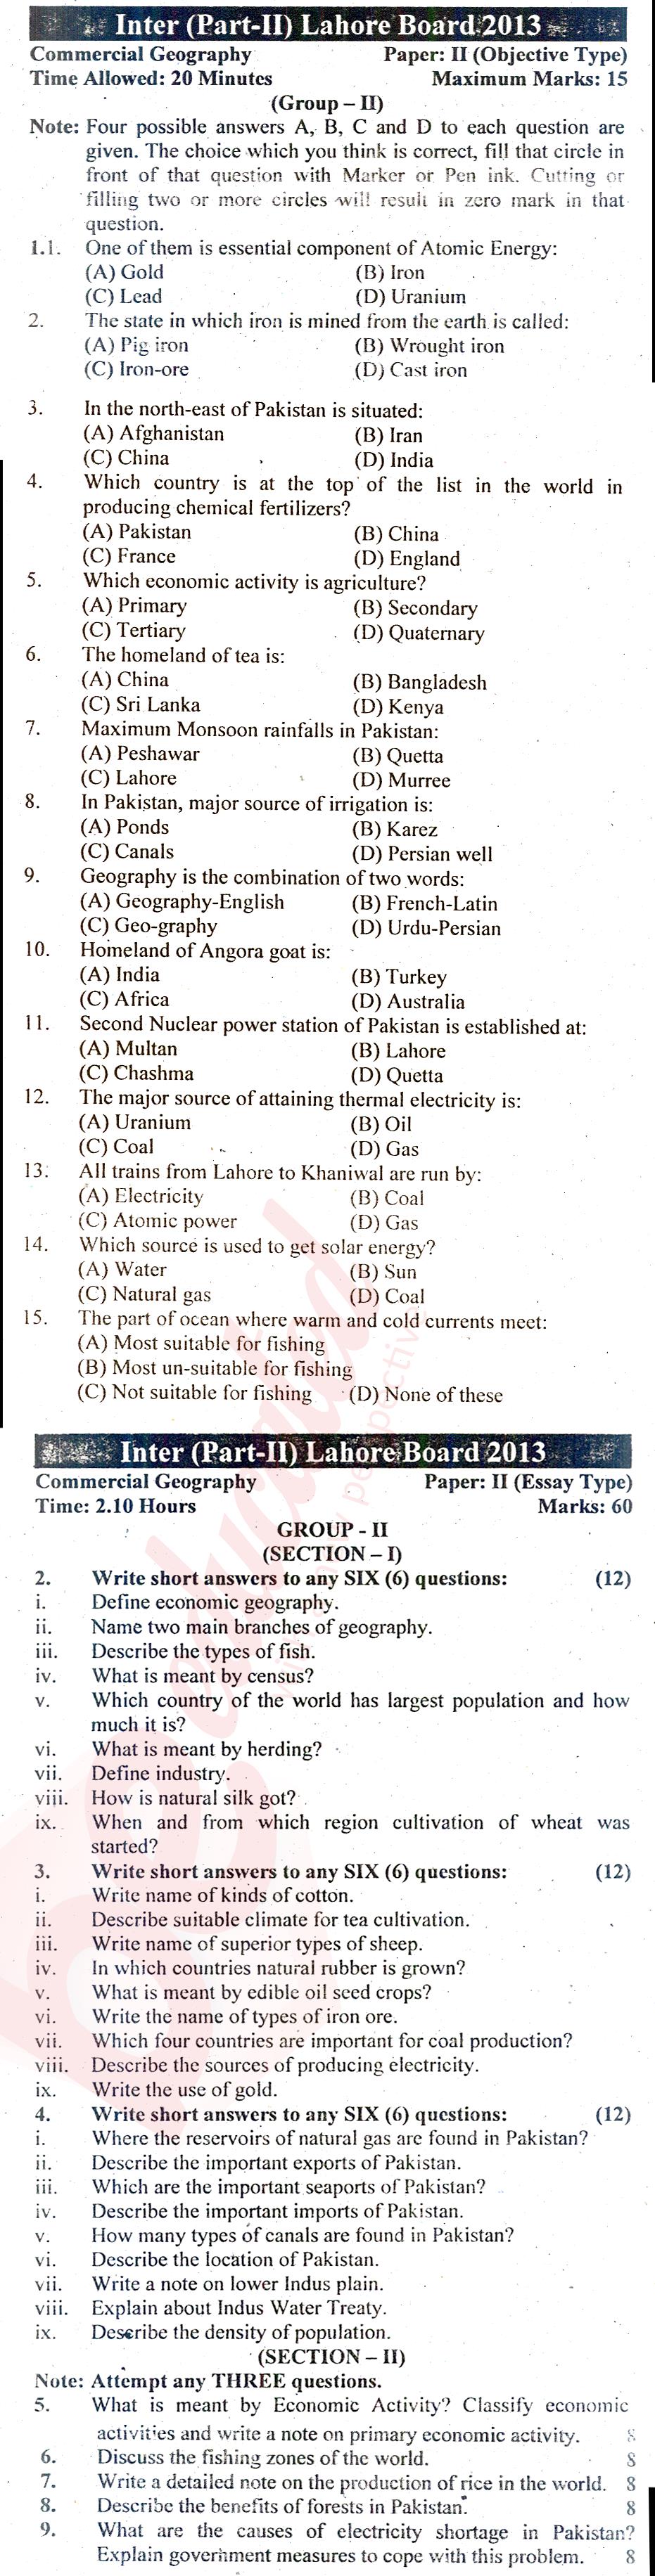 Commercial Geography ICOM Part 2 Past Paper Group 2 BISE Lahore 2013